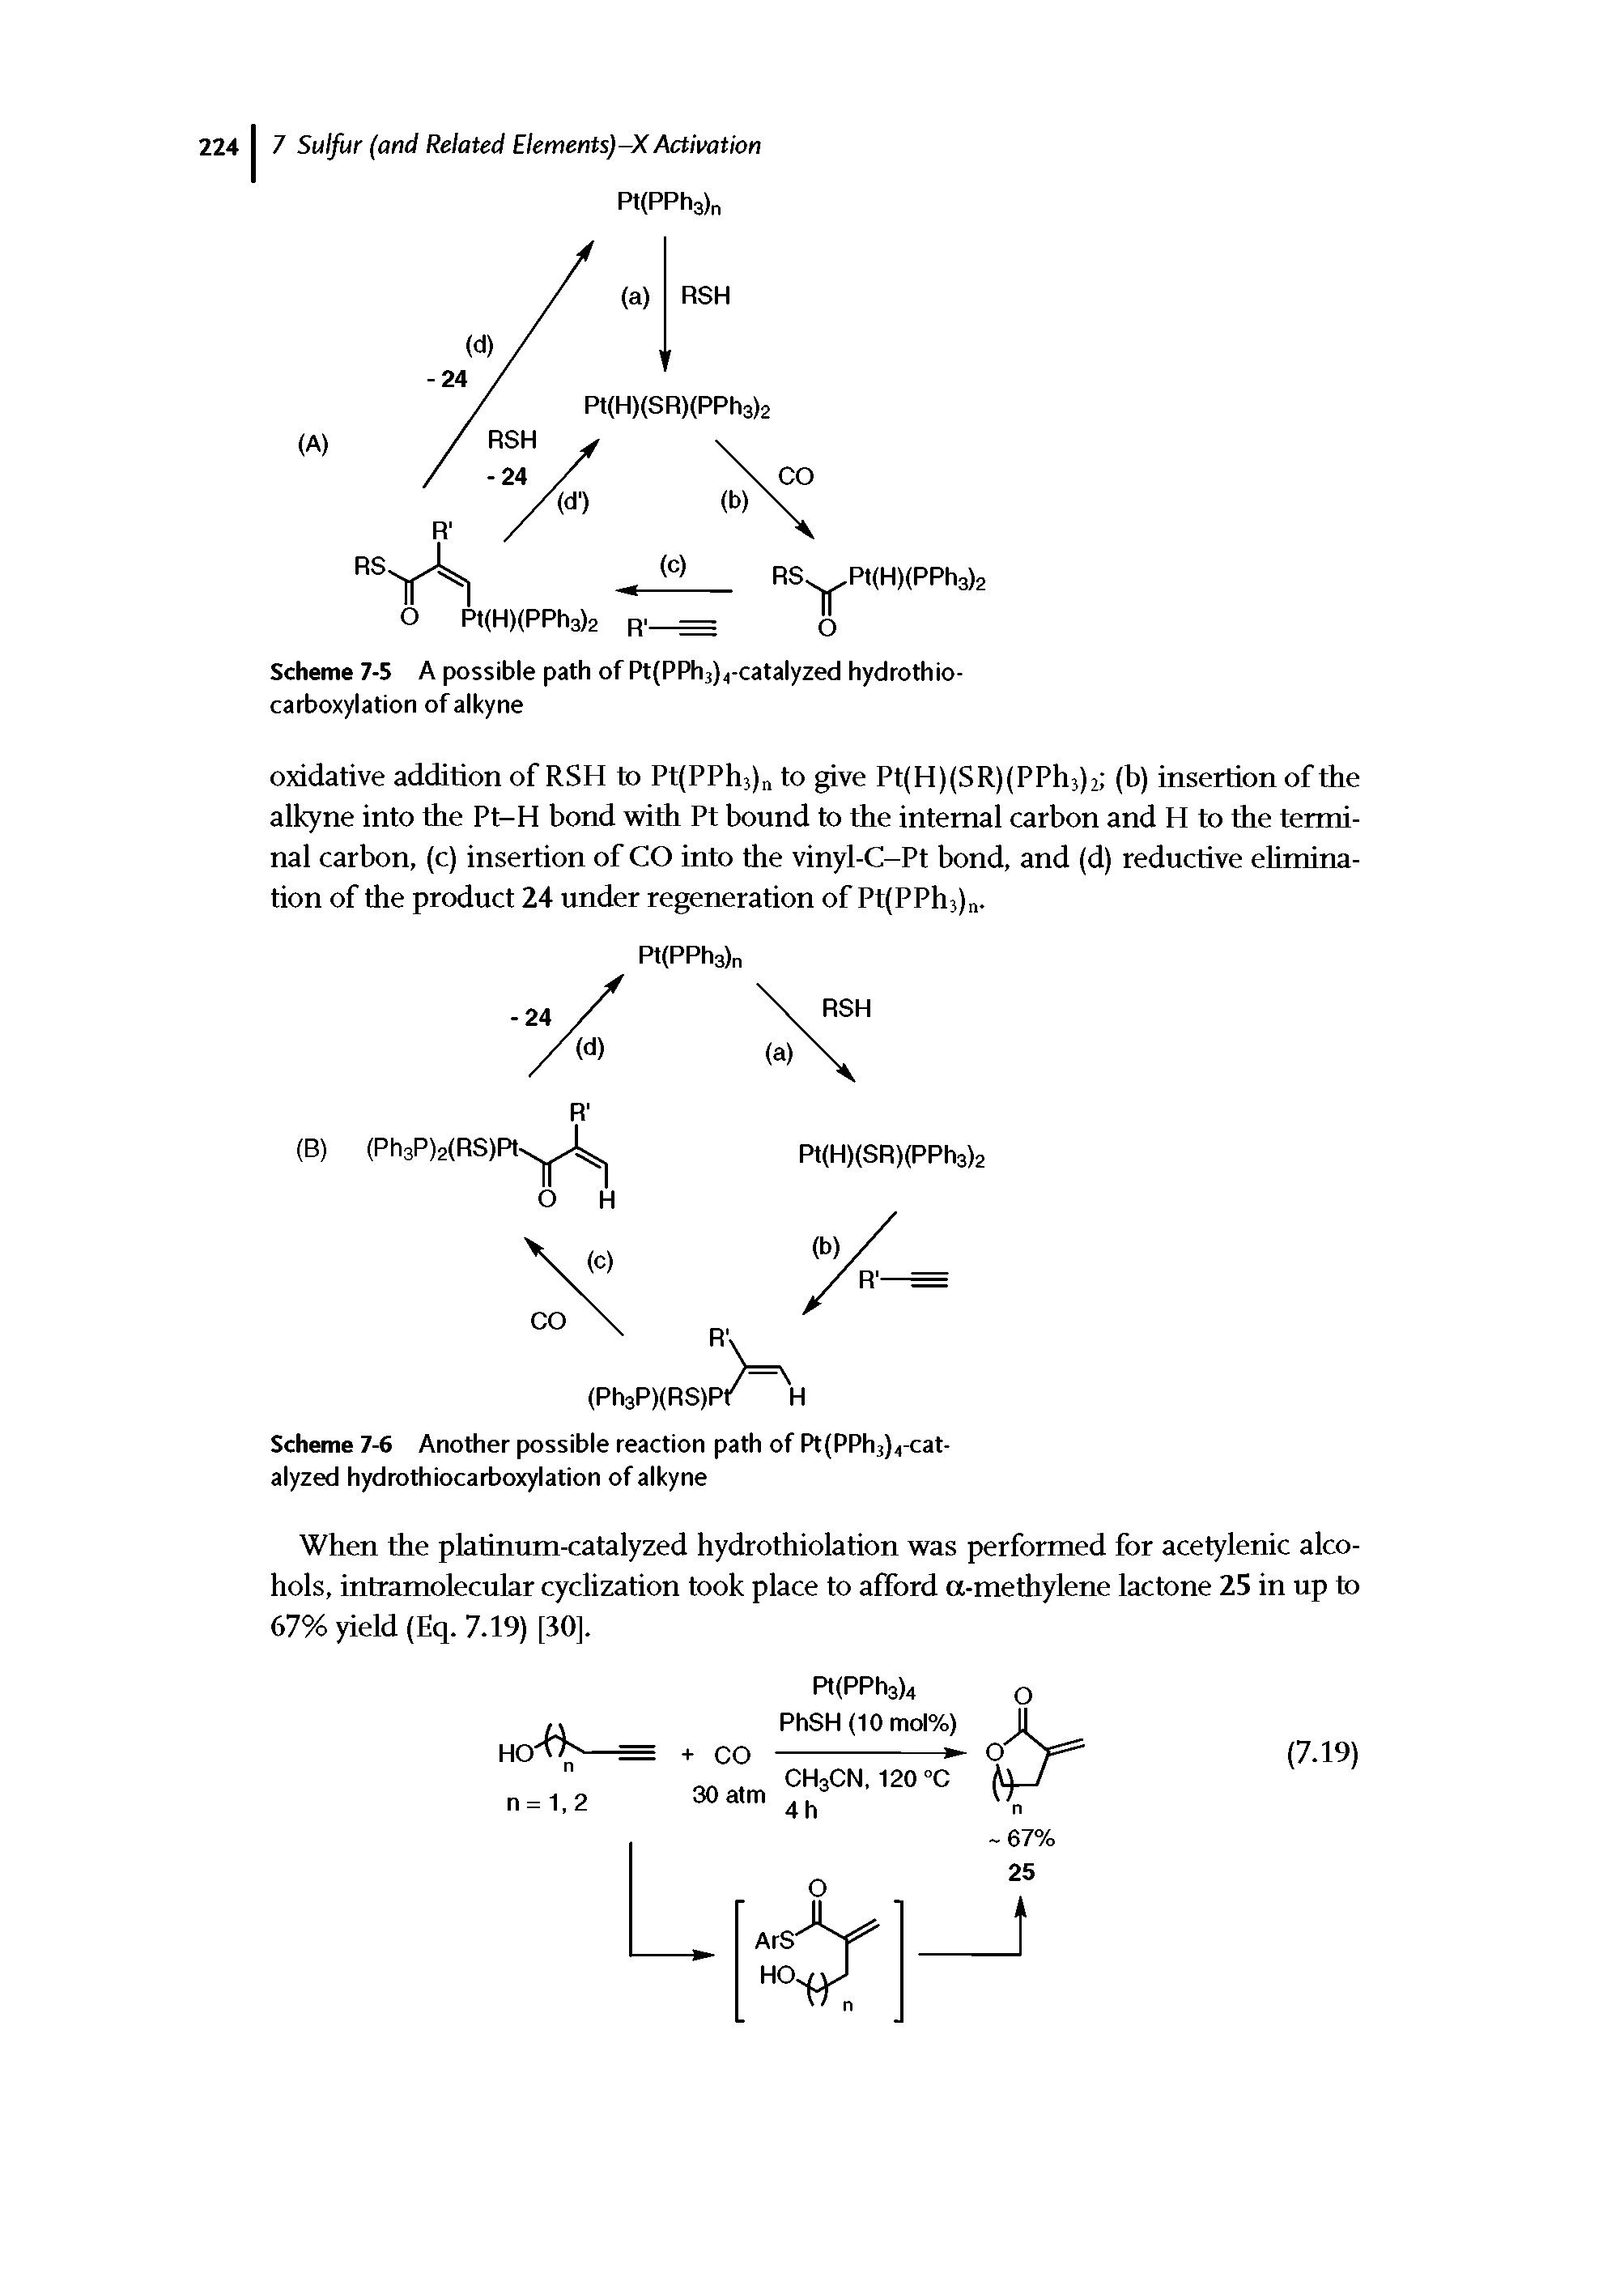 Scheme 7-5 A possible path of Pt(PPh3)j-catalyzed hydrothio-carboxylation of alkyne...